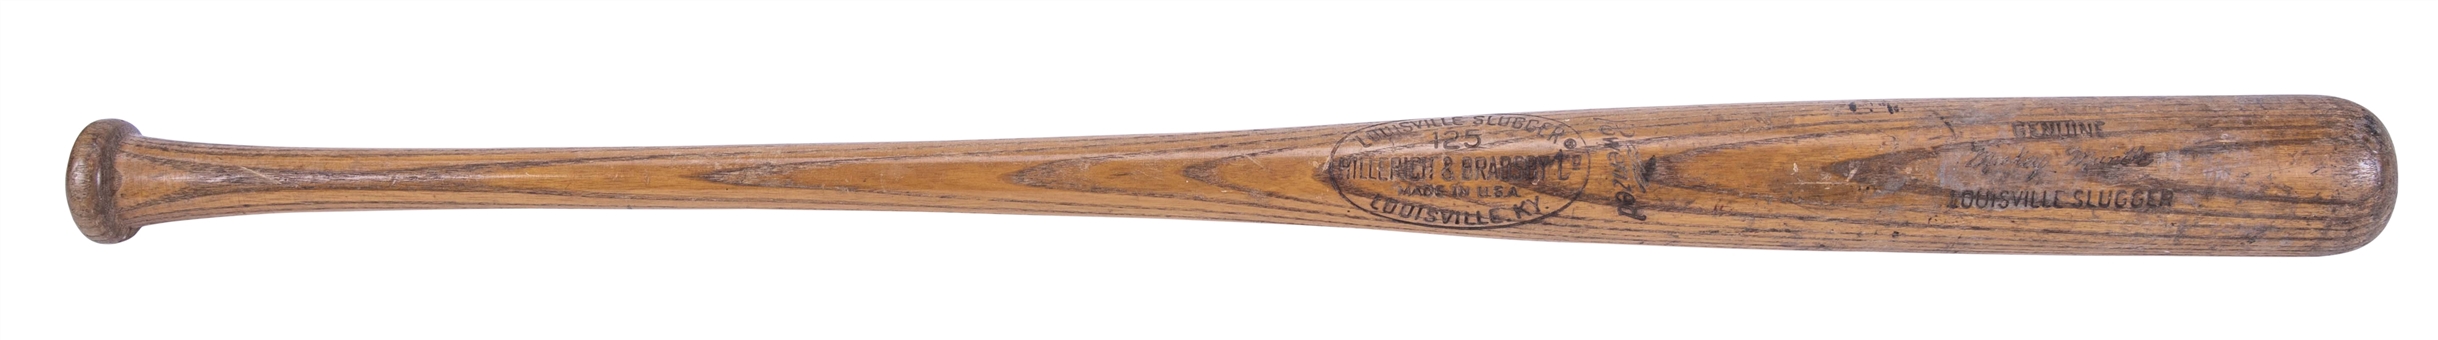 1965-1968 Mickey Mantle Game Used Hillerich & Bradsby M110 Model Bat (MEARS)